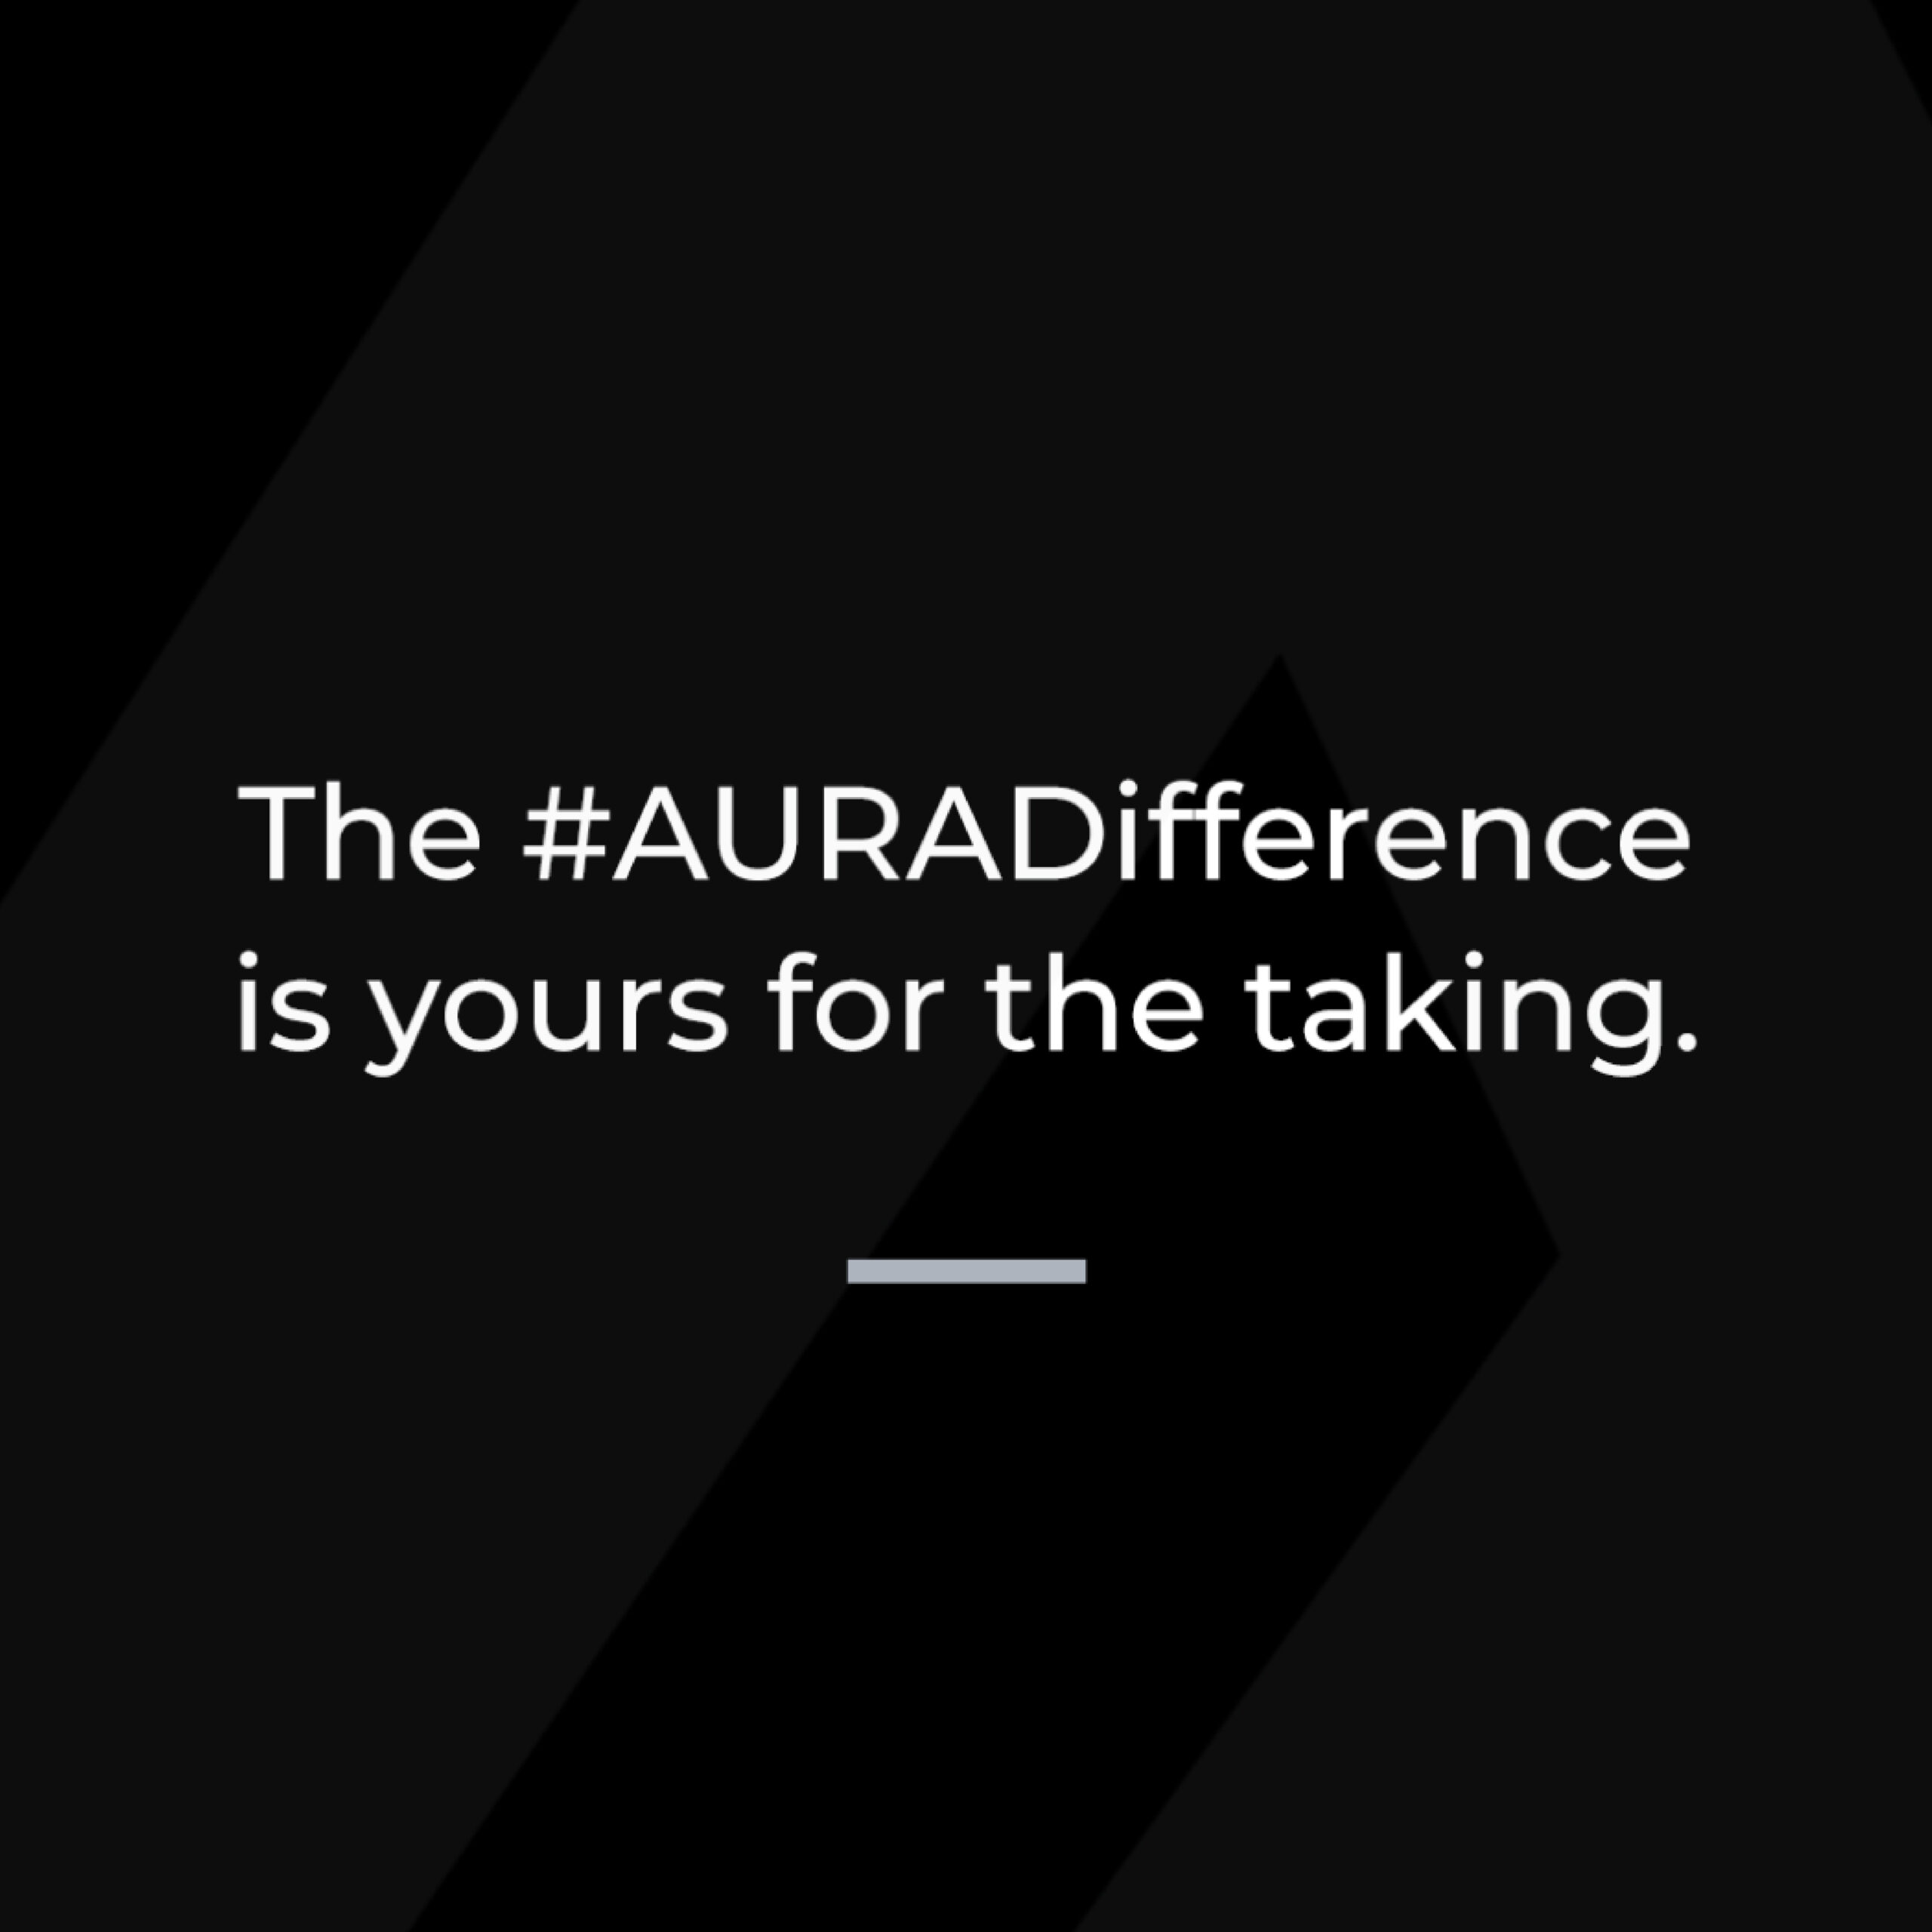 The #AURADifference is yours for the taking.